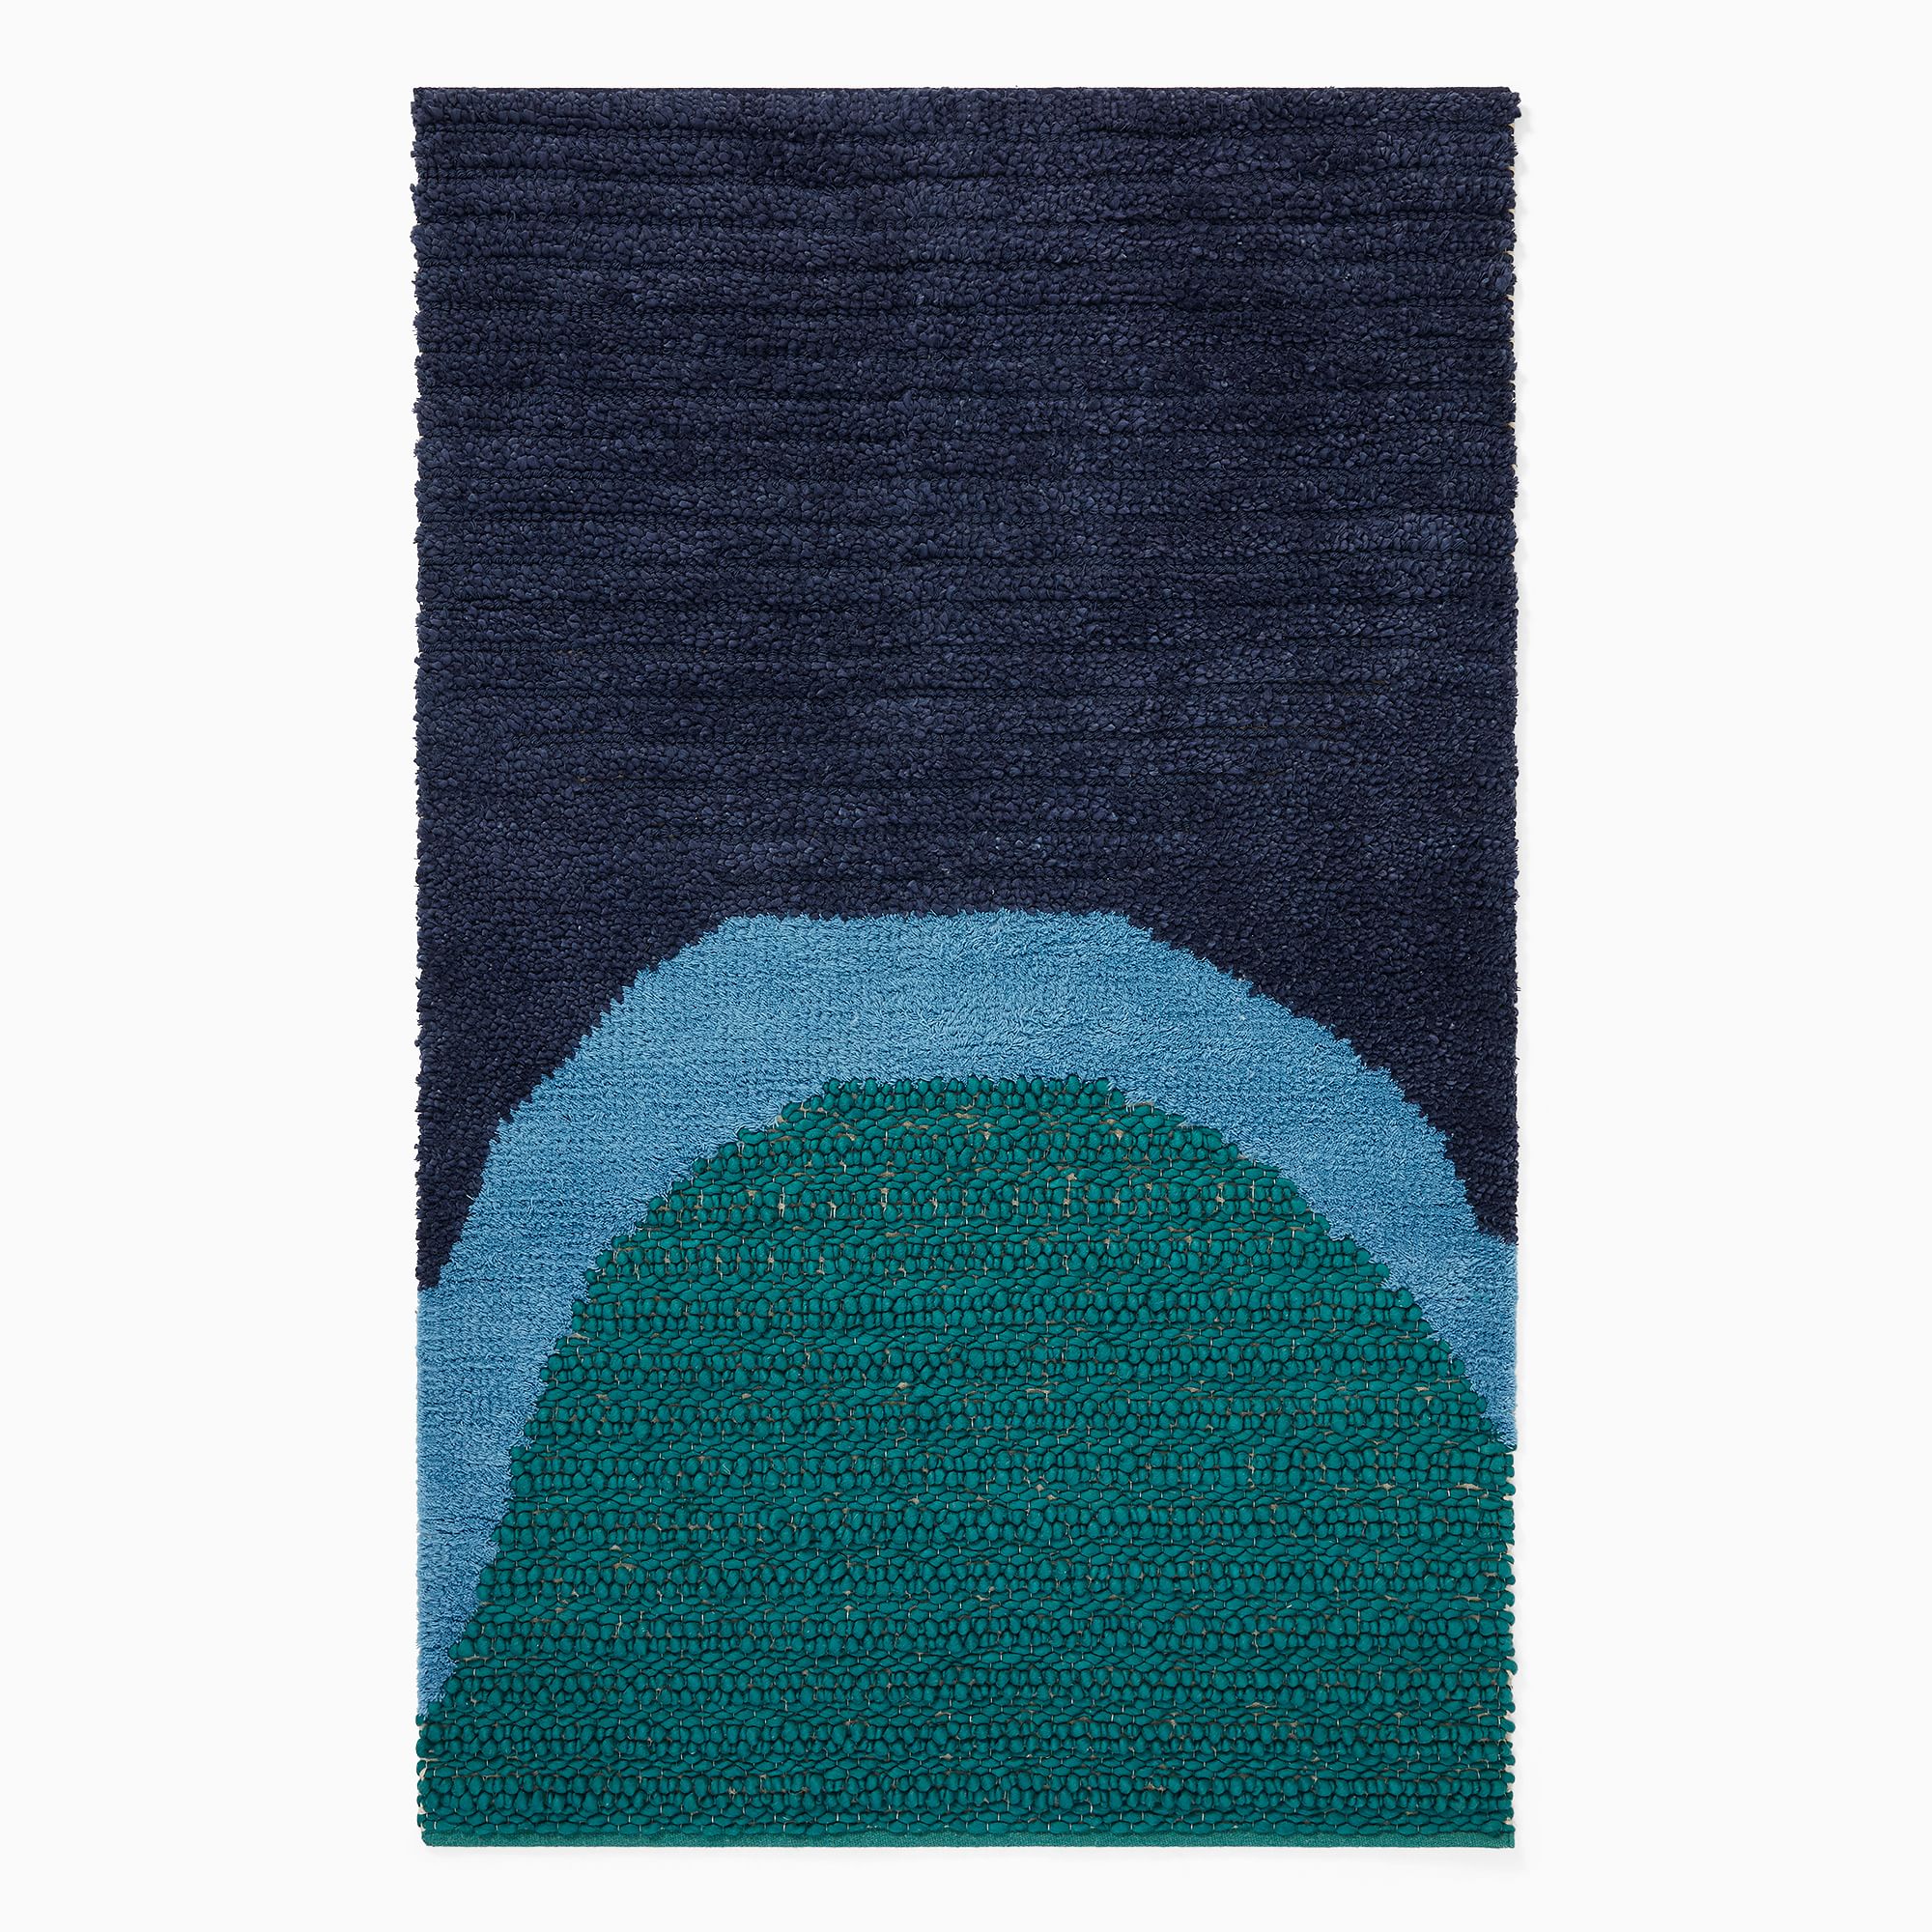 Textured Arches Kids Rug - Clearance | West Elm